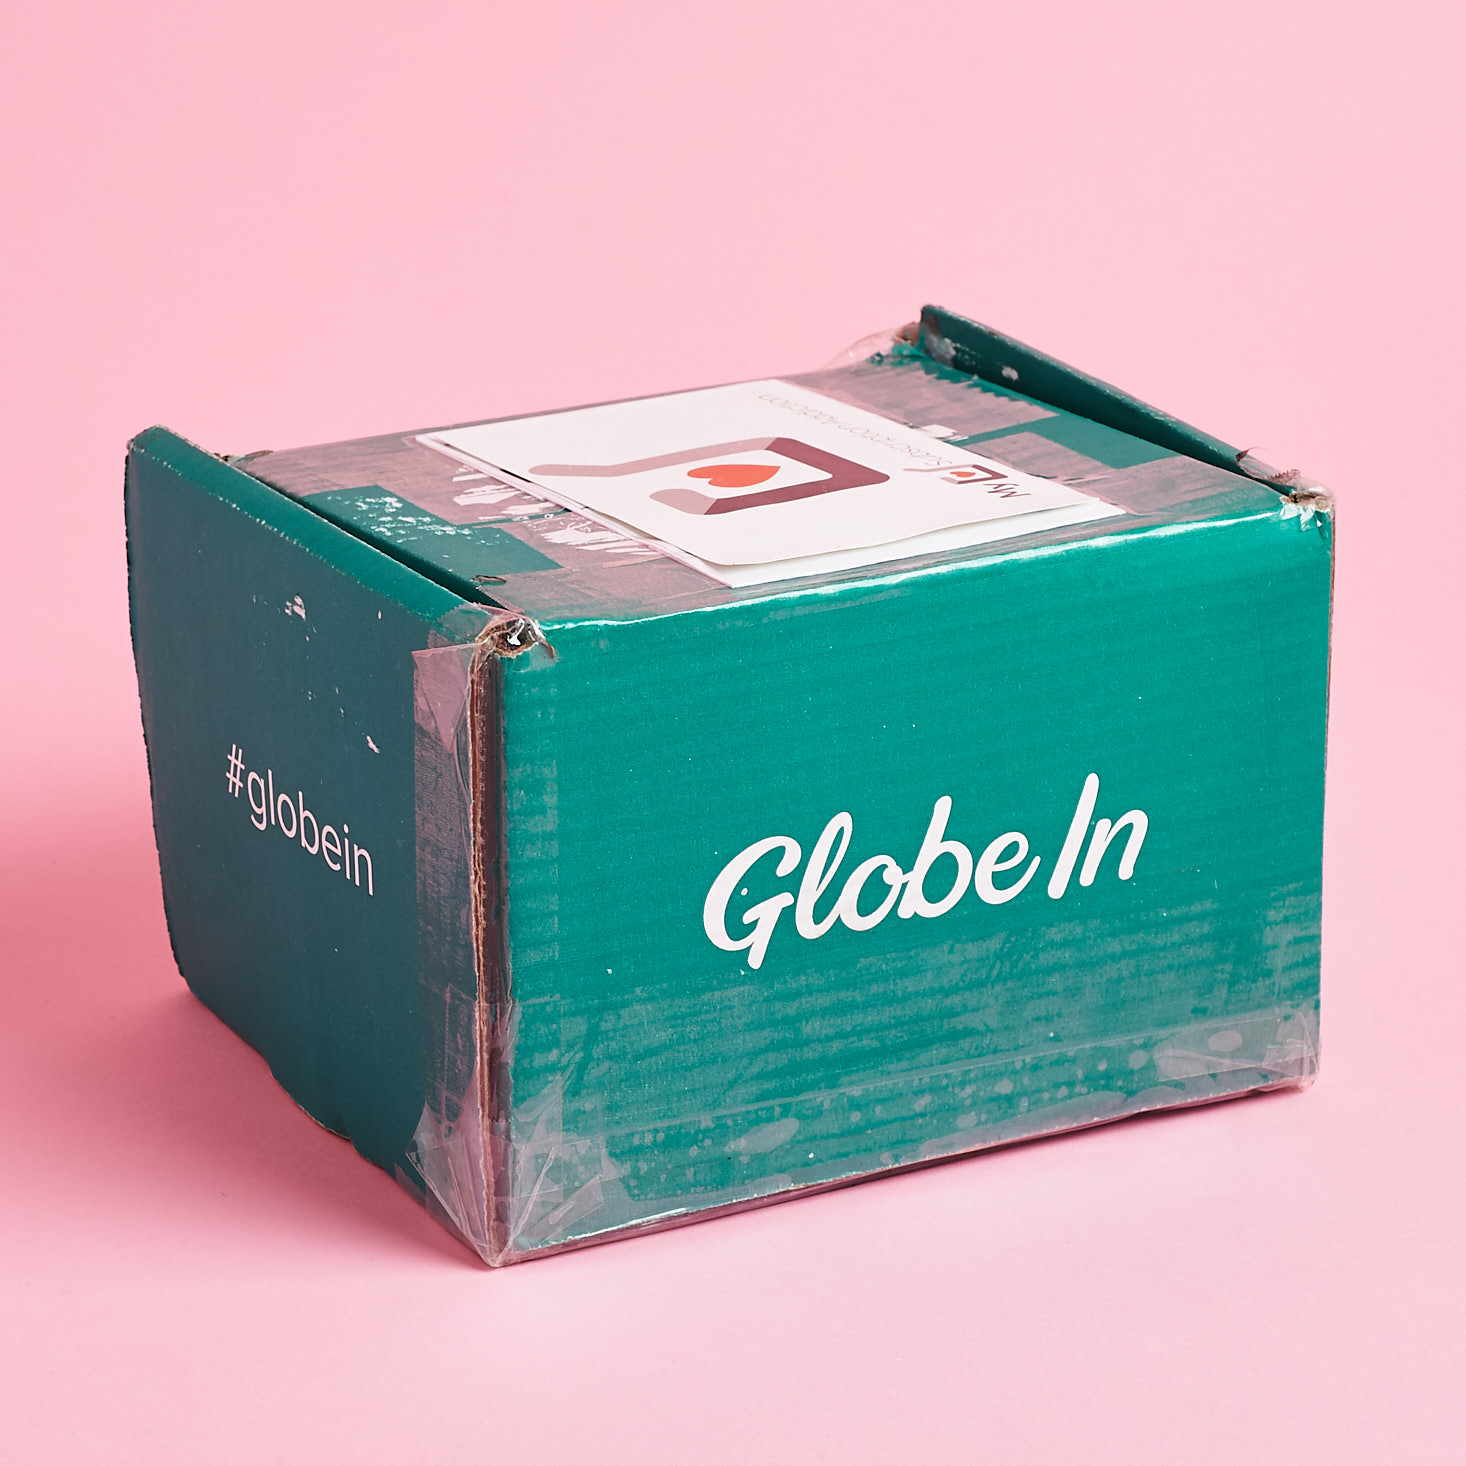 GlobeIn Artisan “The Brew Box” Review + 50% Off Coupon – January 2019